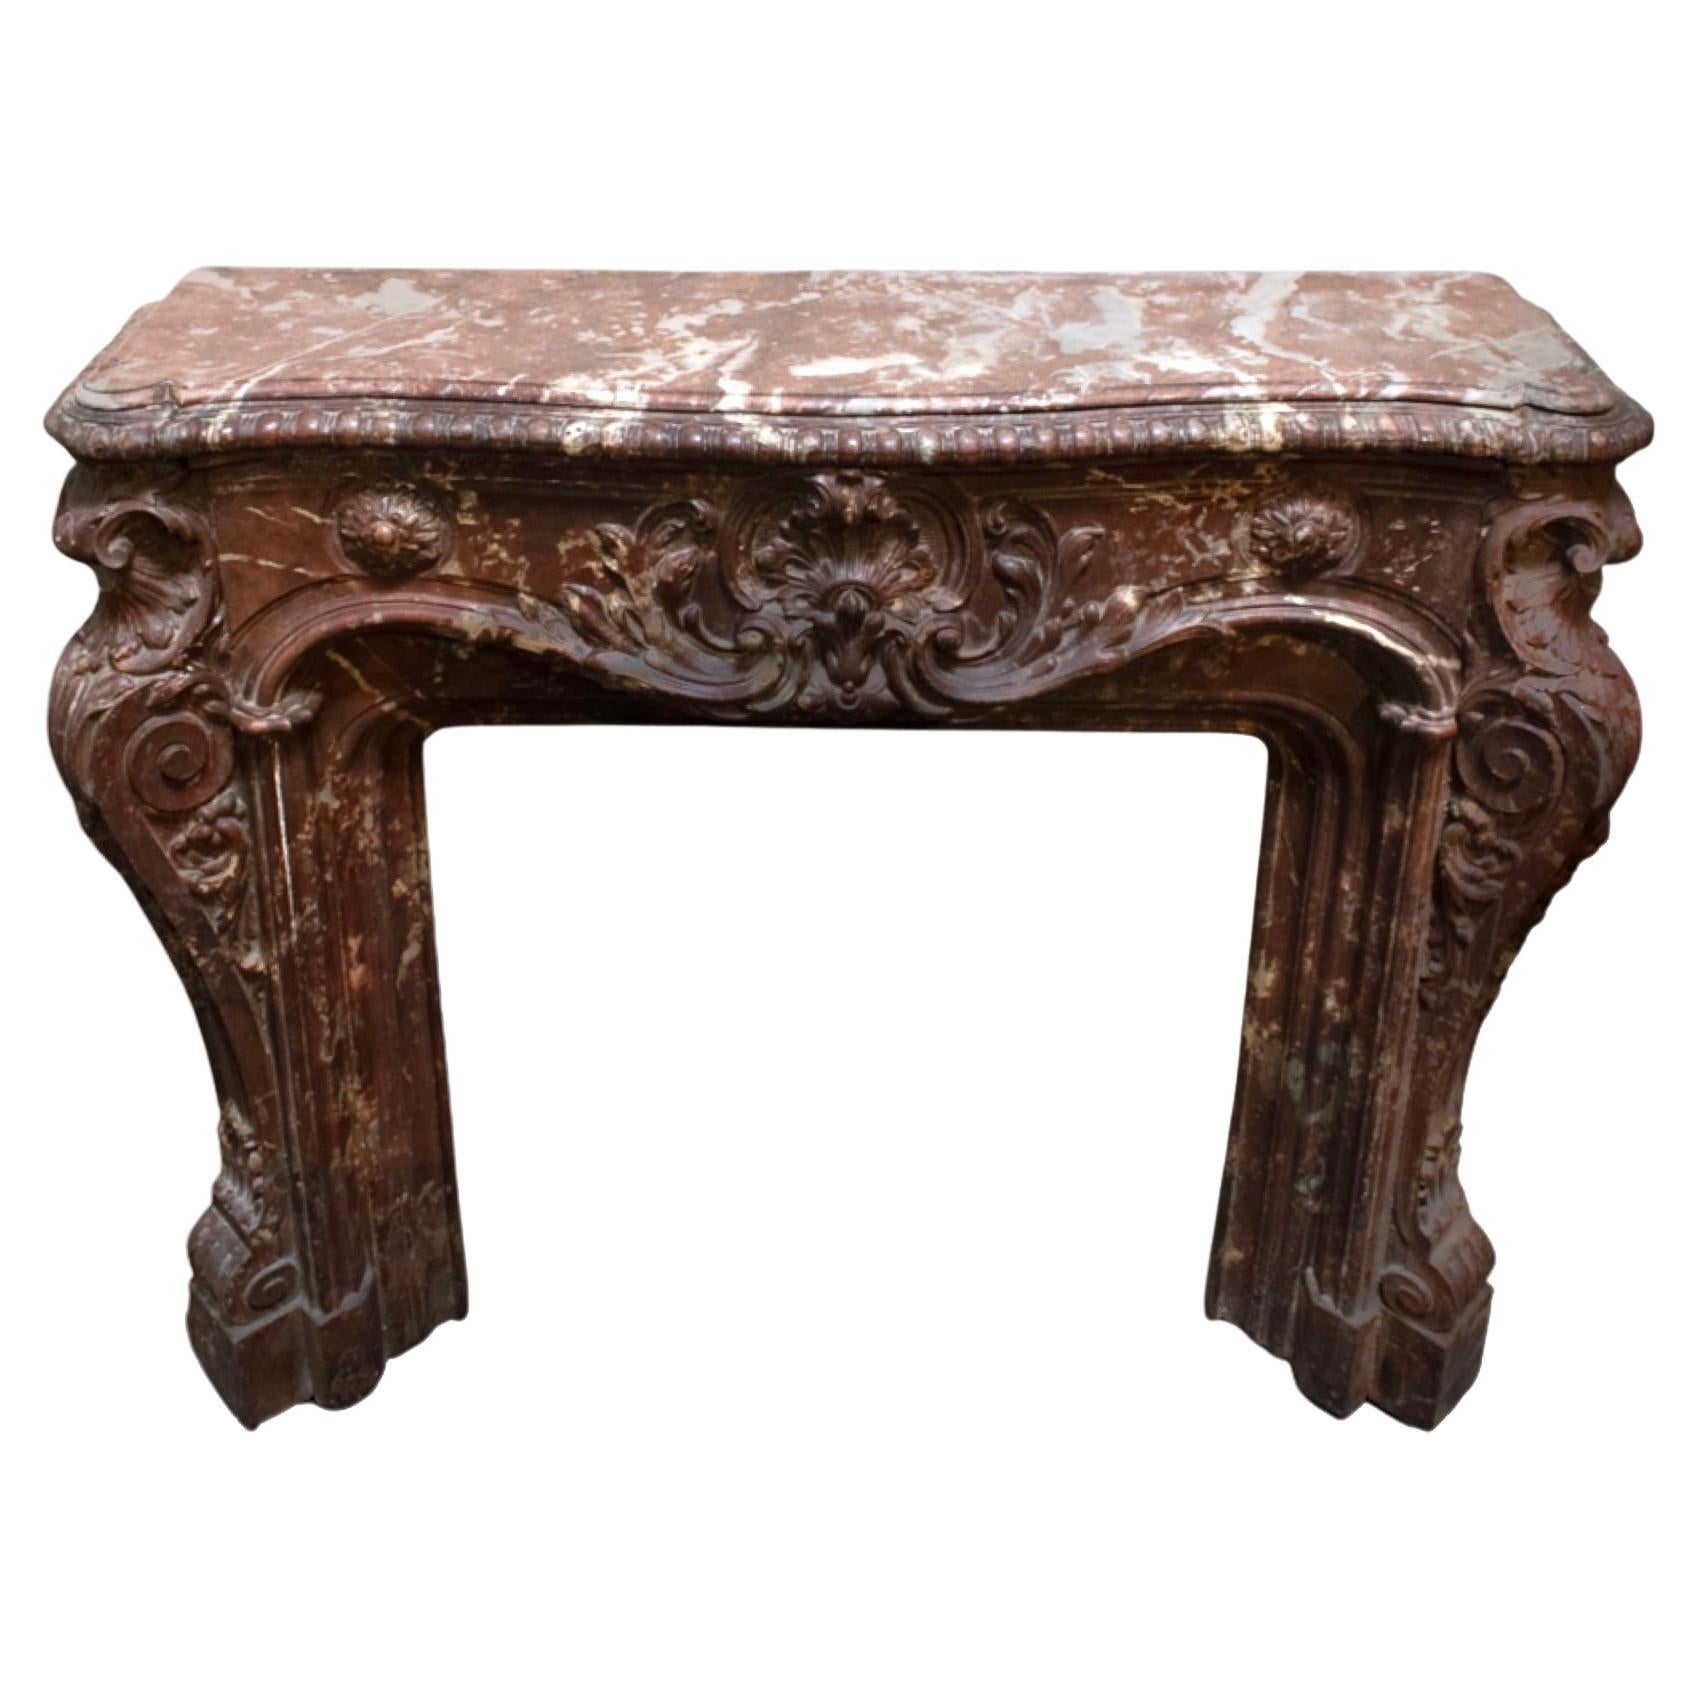 French Iron and Marble Mantel